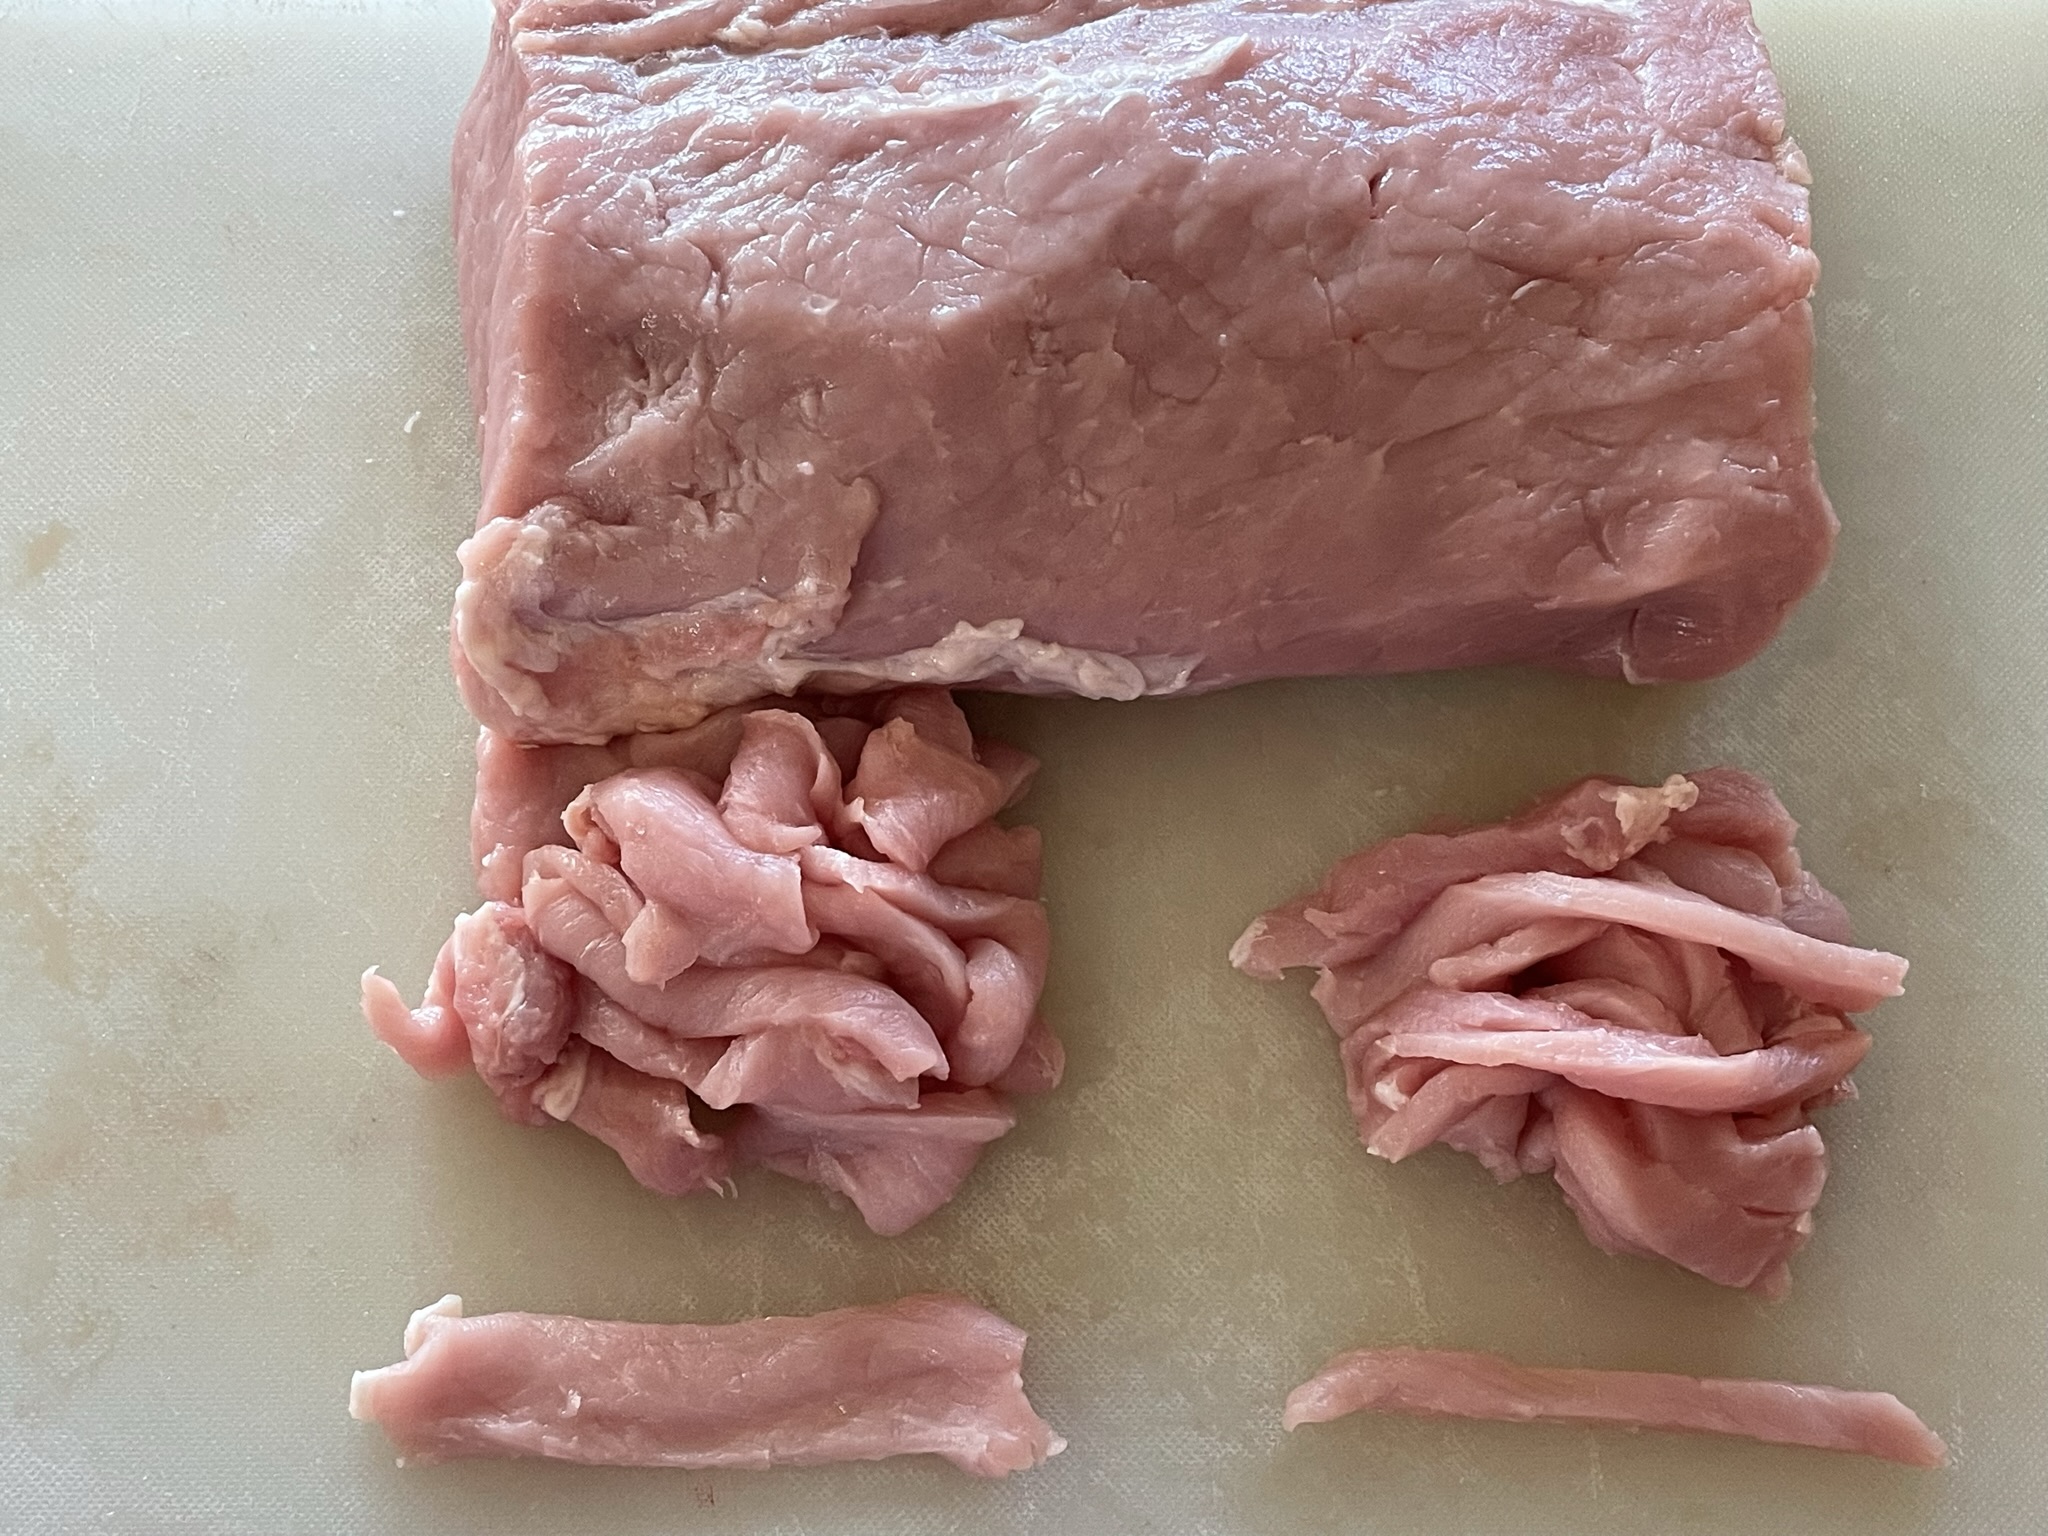 Pork loin cut into slices and strips.